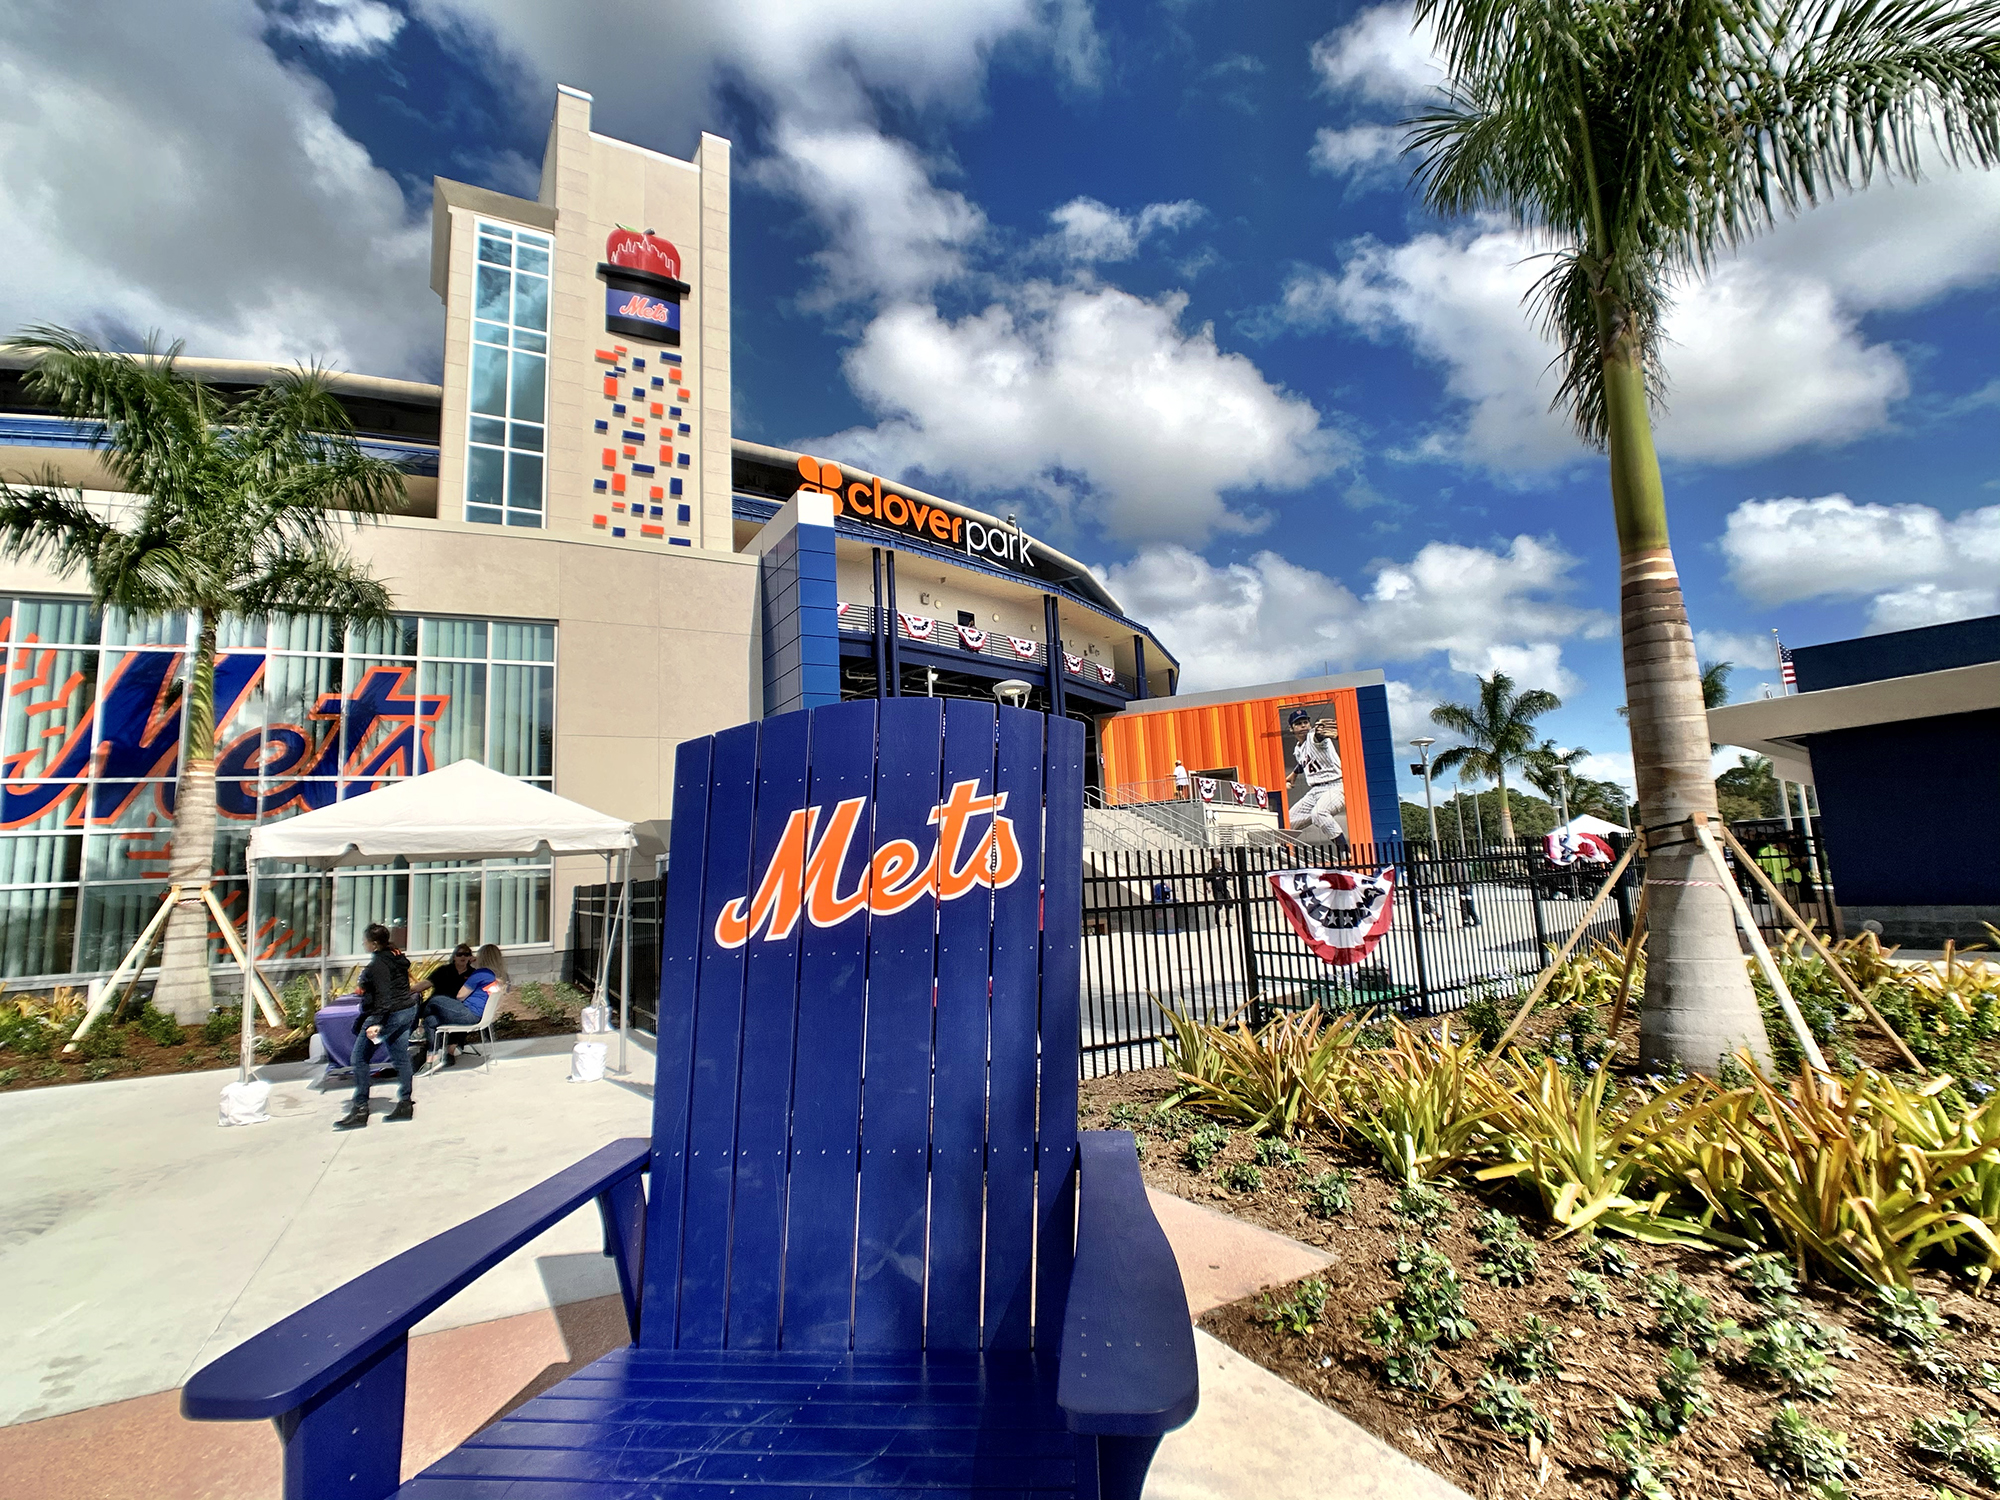 Spring Training: Past vs. Present, by New York Mets